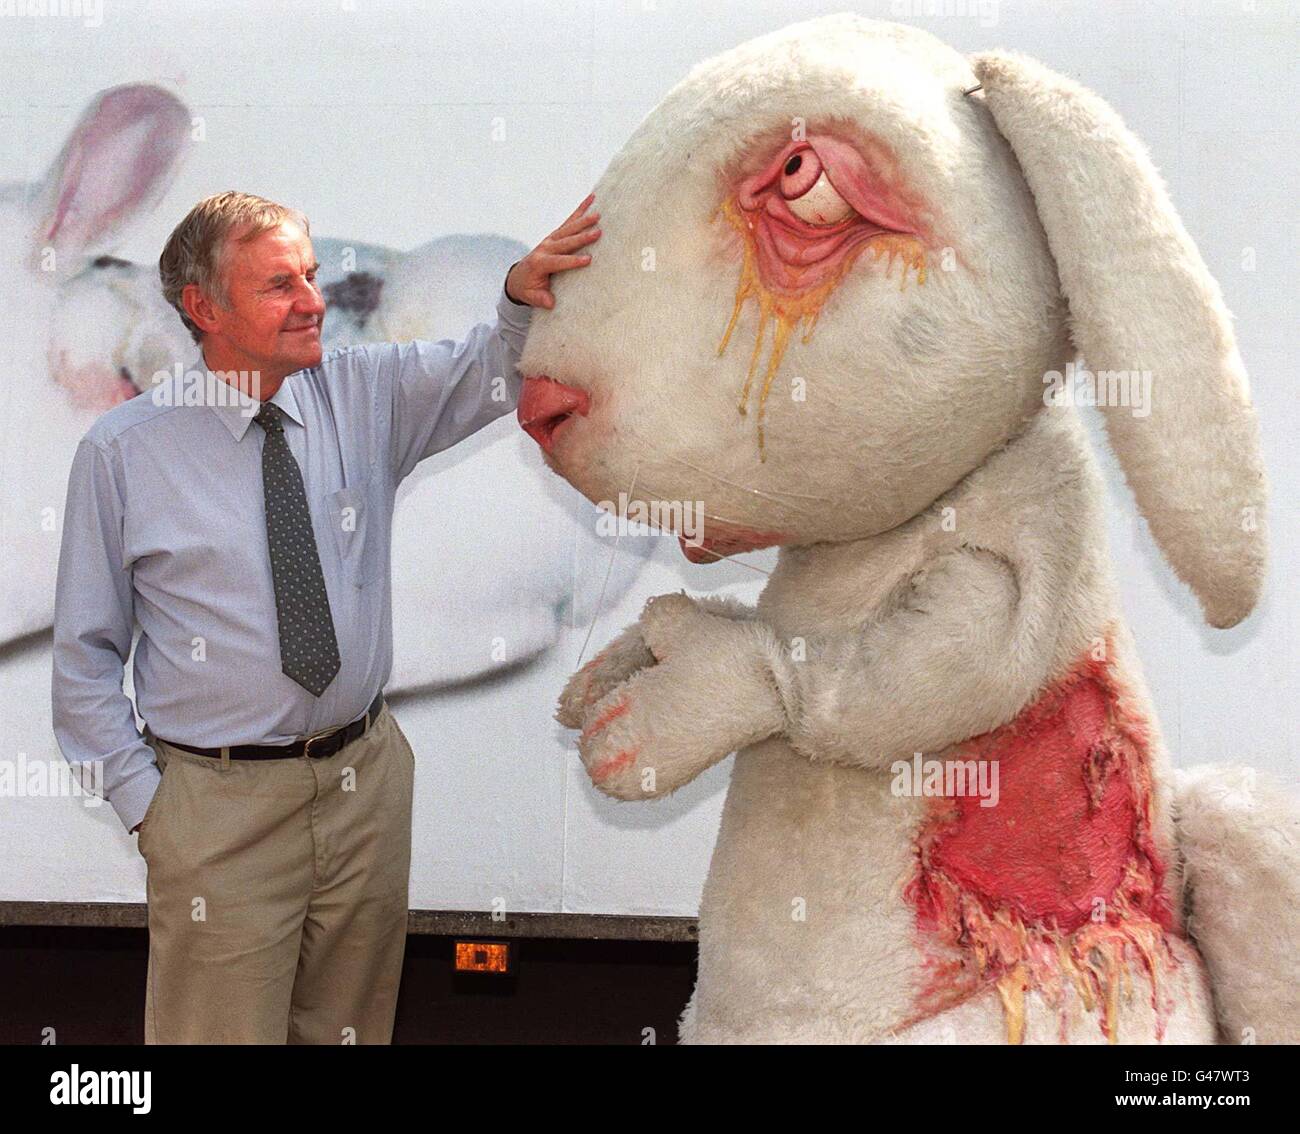 Richard Briers comforts 'Vanity' the rabbit at the launch of a new campaign by the British Union for the Abolition of Vivisection (BUAV) today in London. The campaign is promoting an internationally agreed standard for cosmetics that have not been tested on animals, being launched in London, Brussels and Los Angeles today. Photo by Ben Curtis/PA. Watch for PA Story. Stock Photo